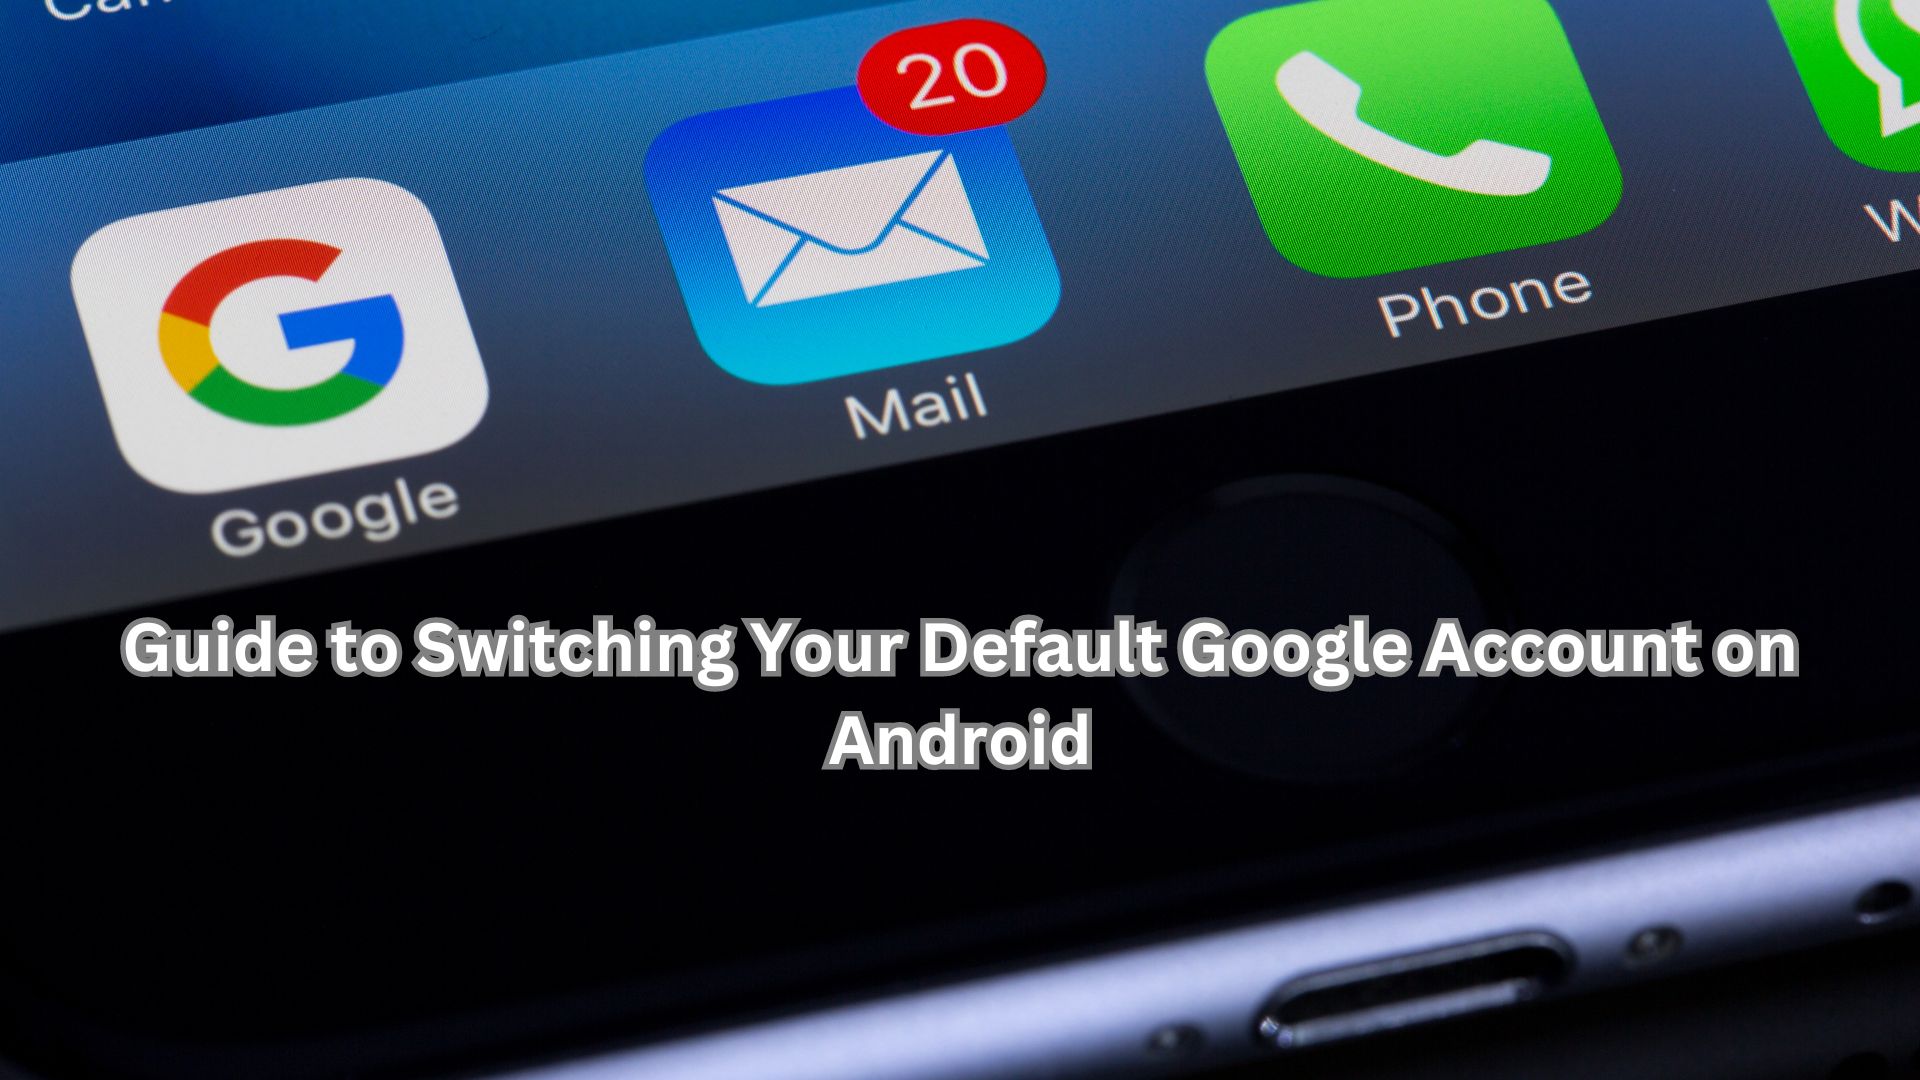 Guide to Switching Your Default Google Account on Android